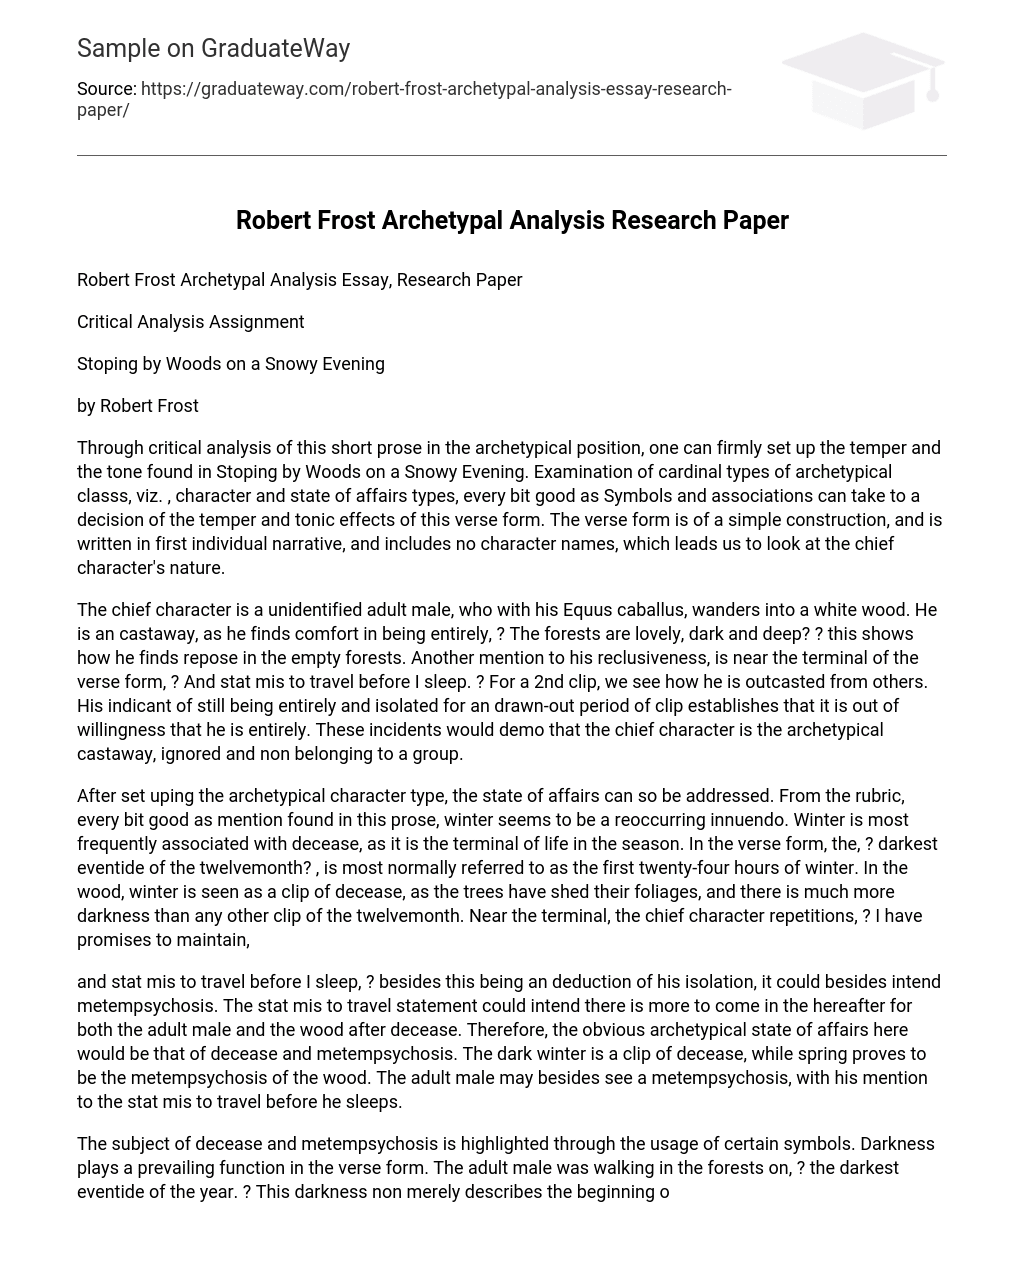 Robert Frost Archetypal Analysis Research Paper